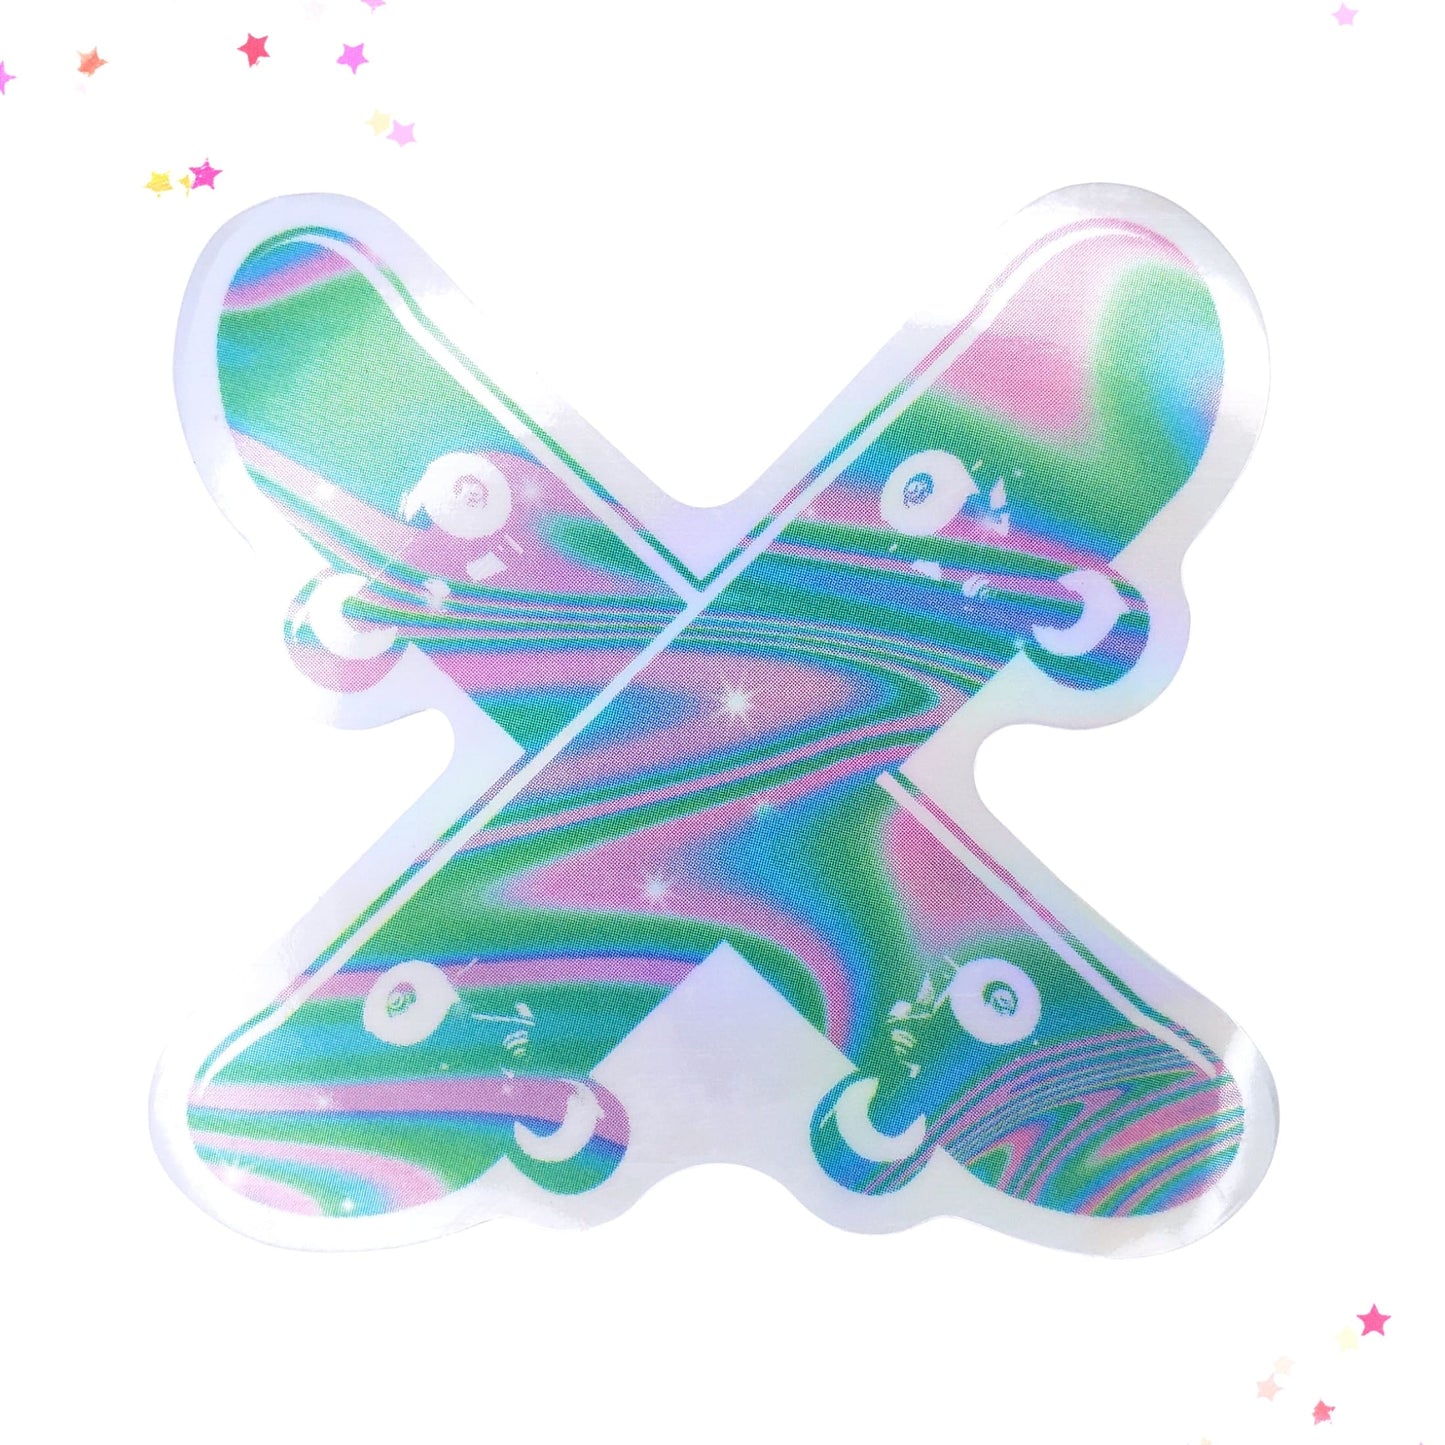 Two Skateboards X Crossing Waterproof Holographic Sticker from Confetti Kitty, Only 1.0